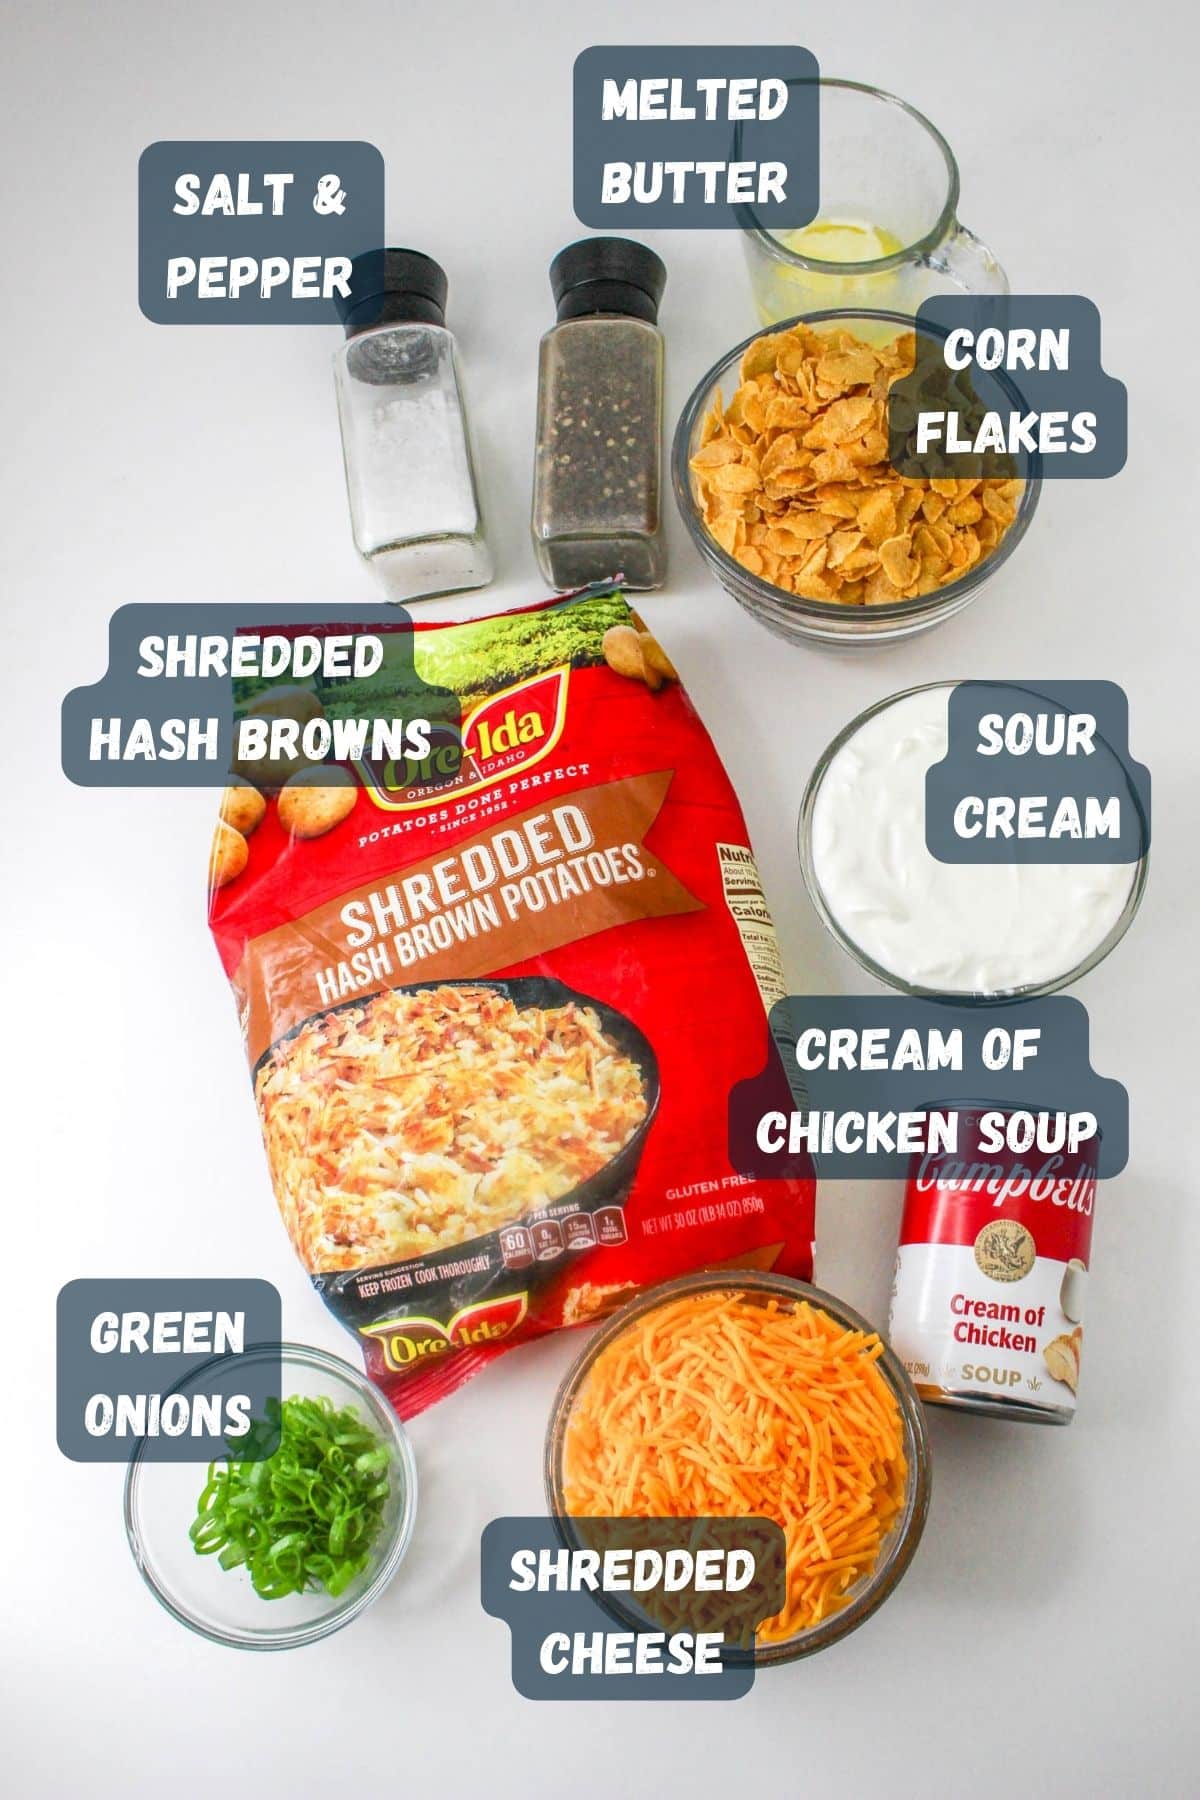 Ingredients shown used to make cheesy hashbrown casserole. 